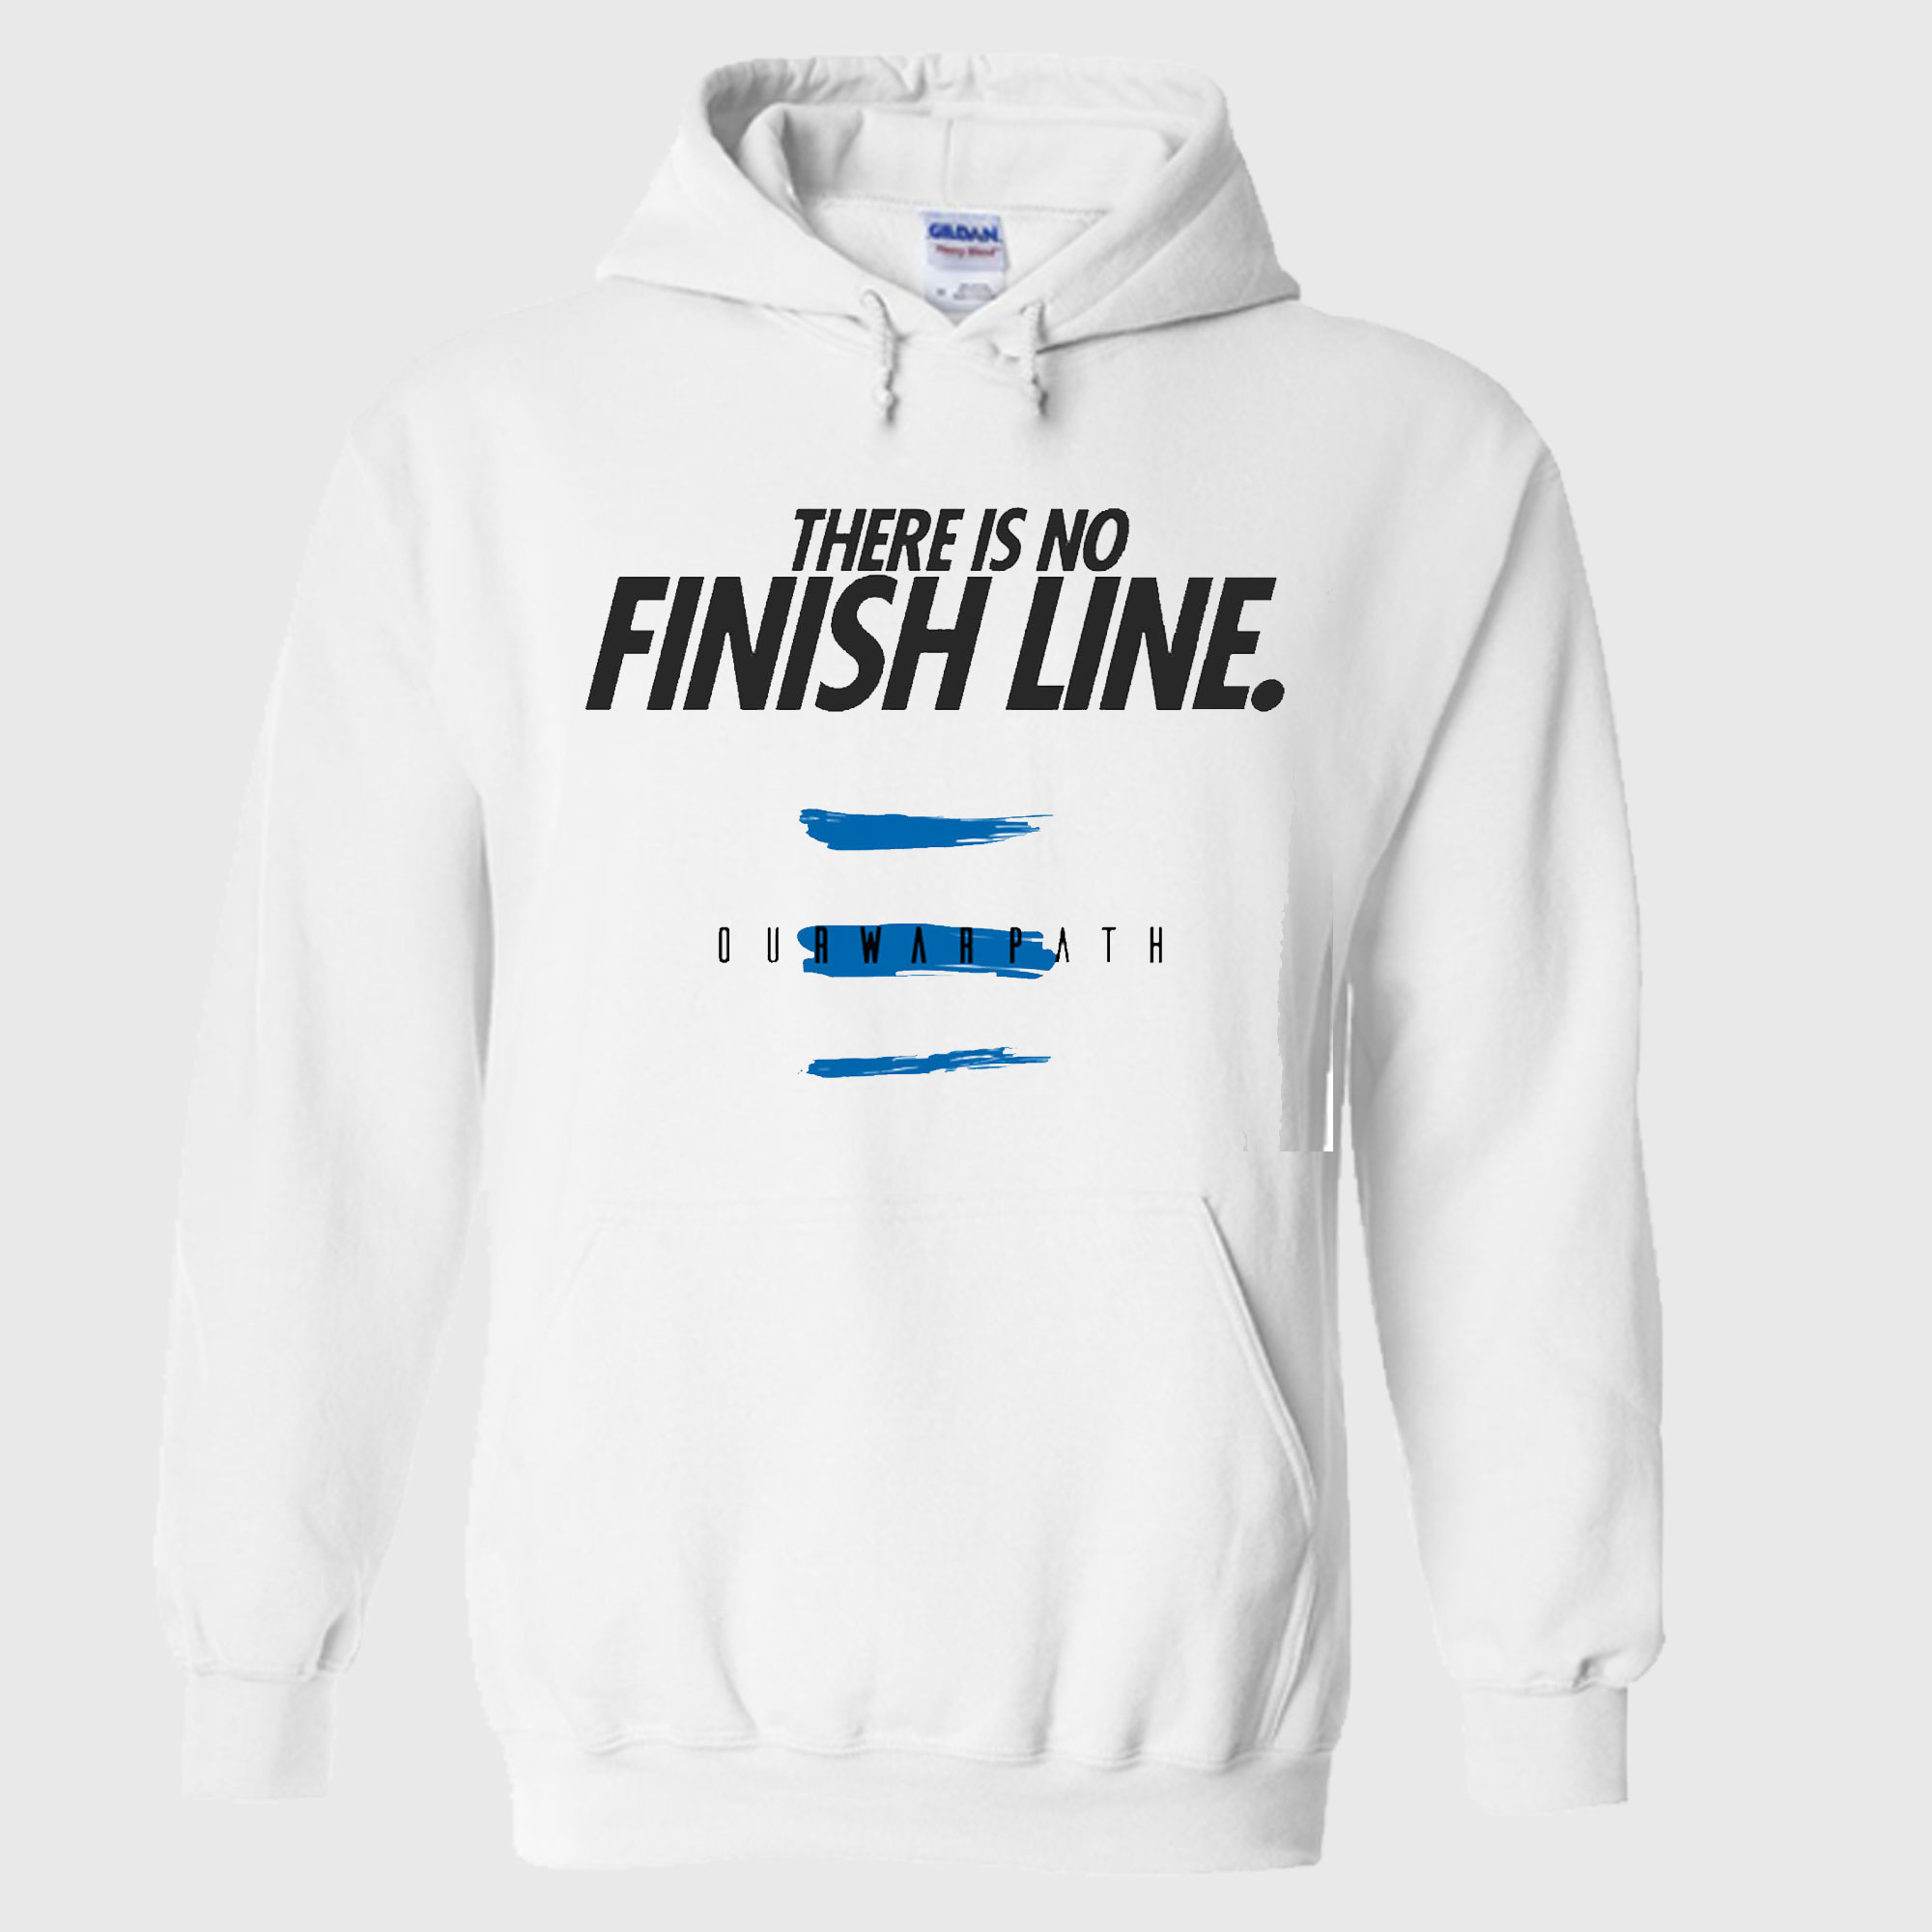 There Is No Finish Line Ourwarpath Hoodie